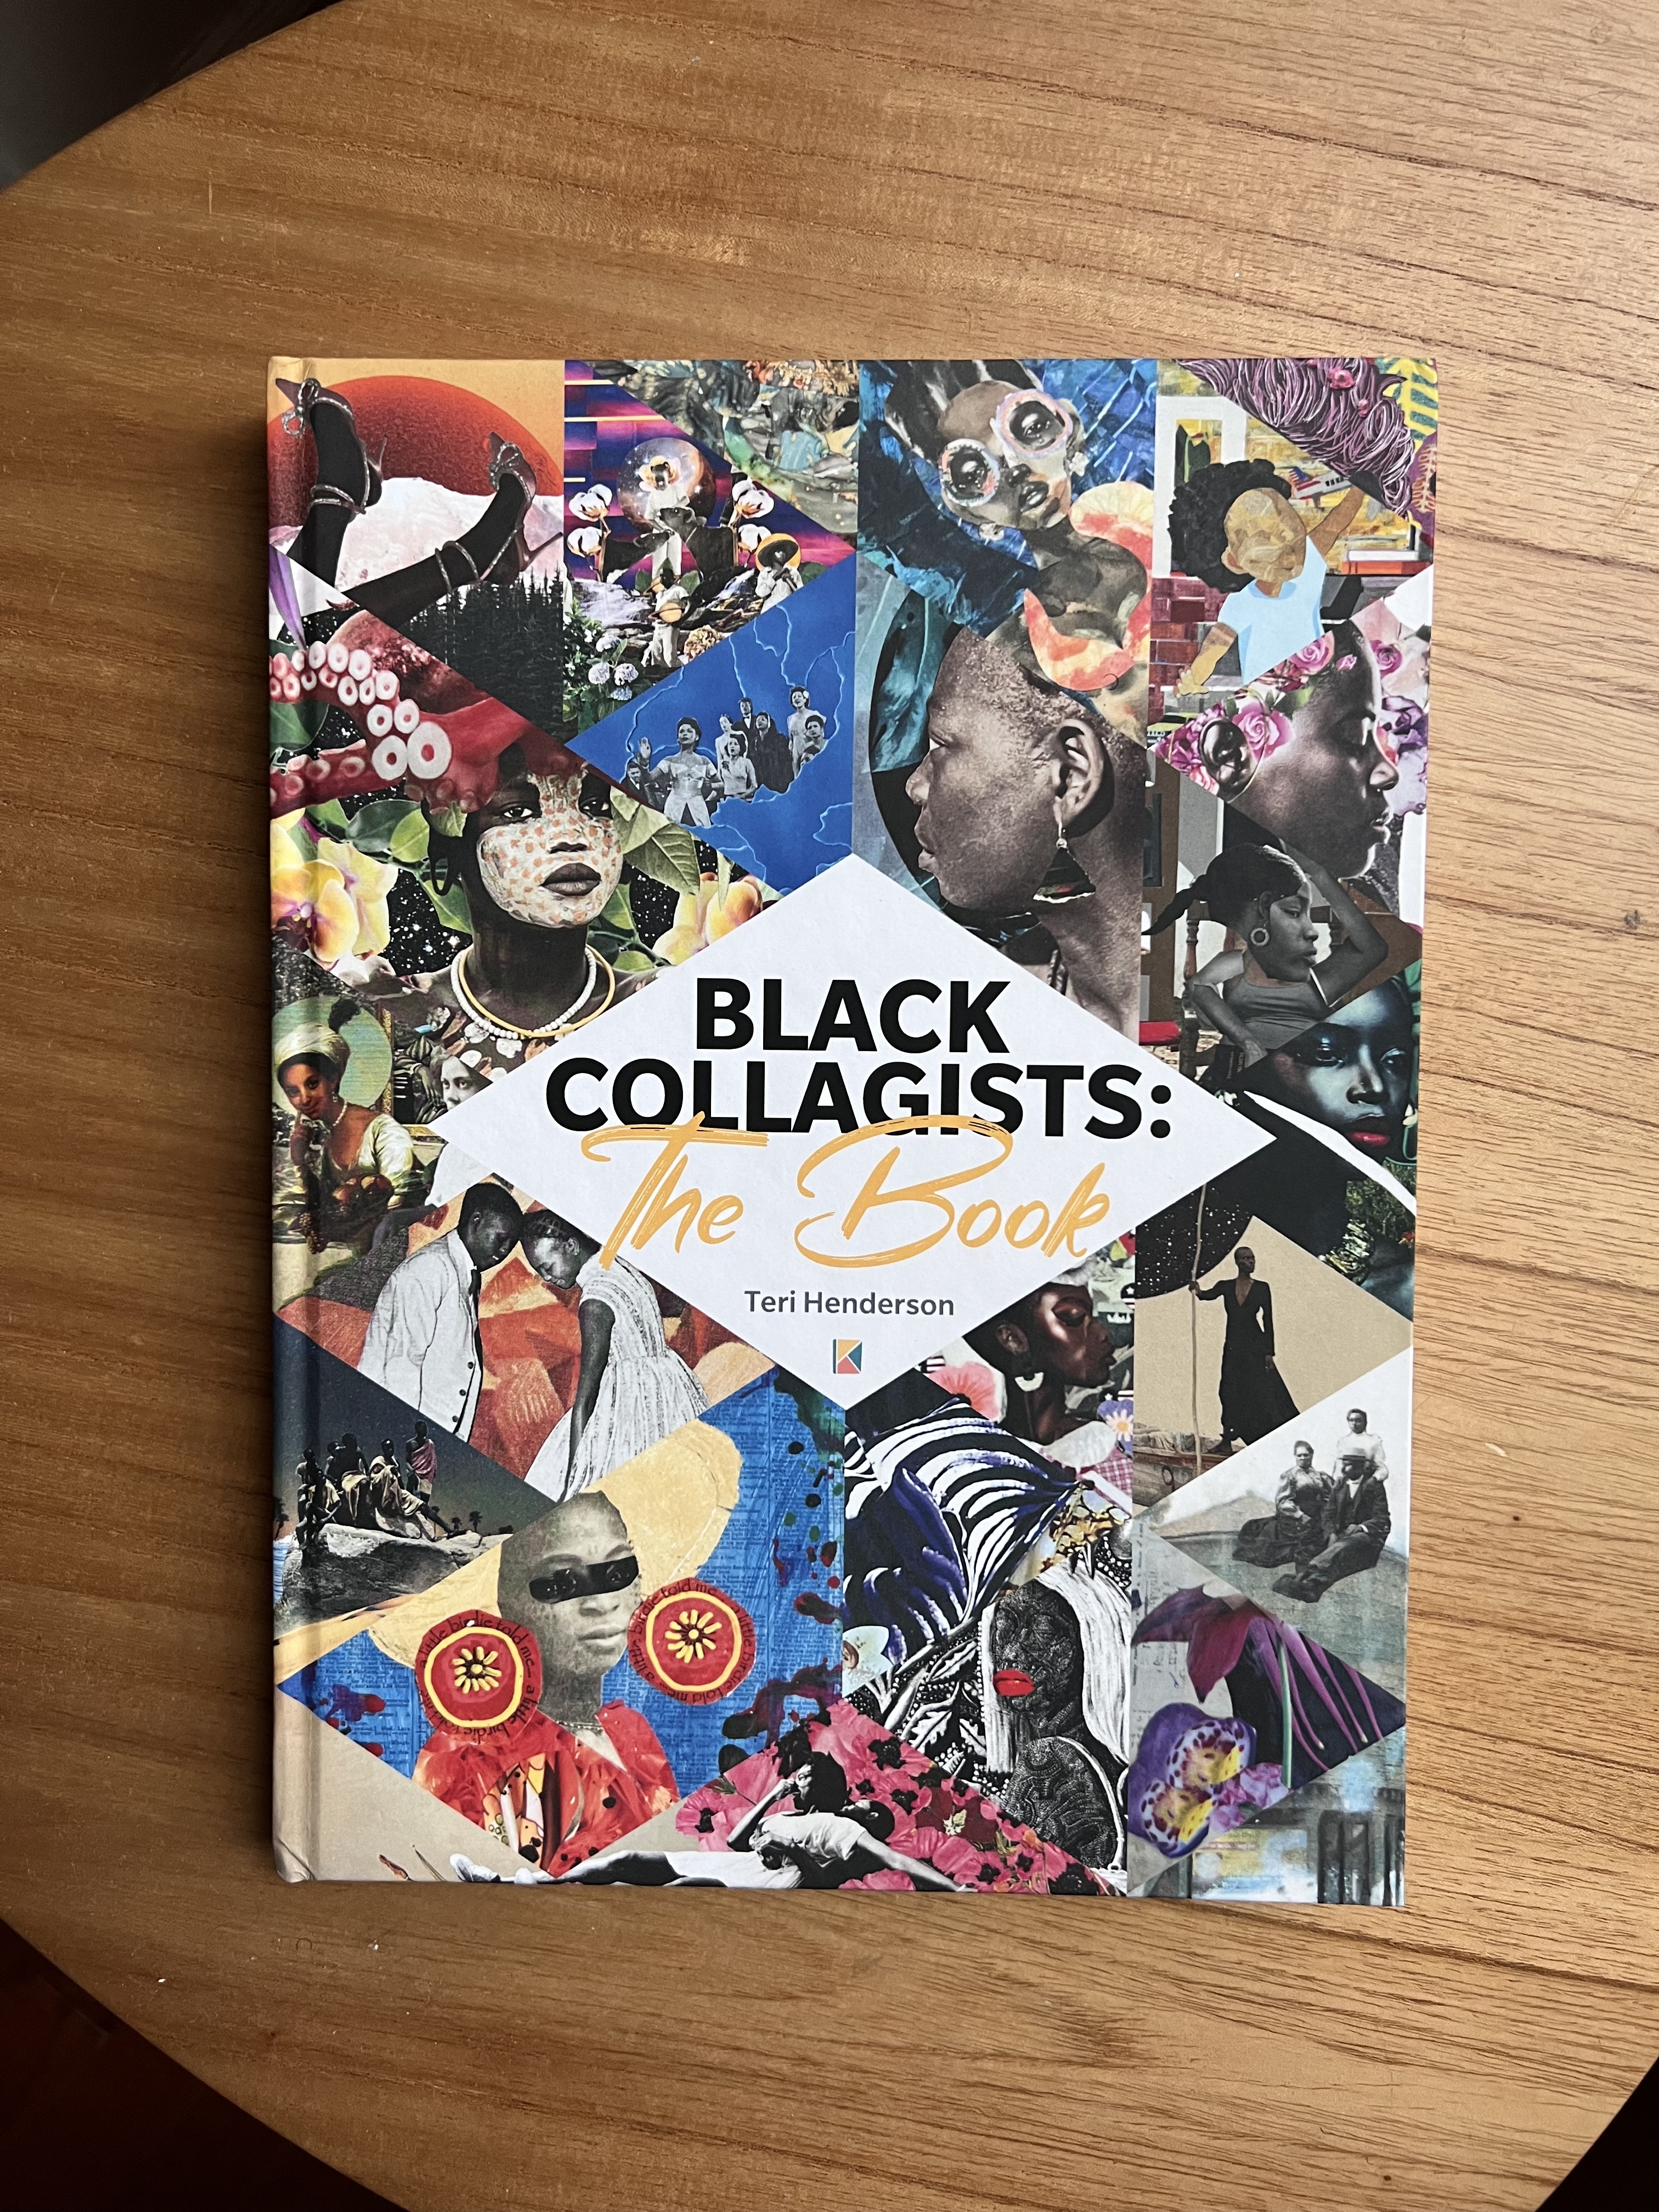 Black Collagists: The Book by Teri Henderson '14 (Photo Credit - Isiah Winters)